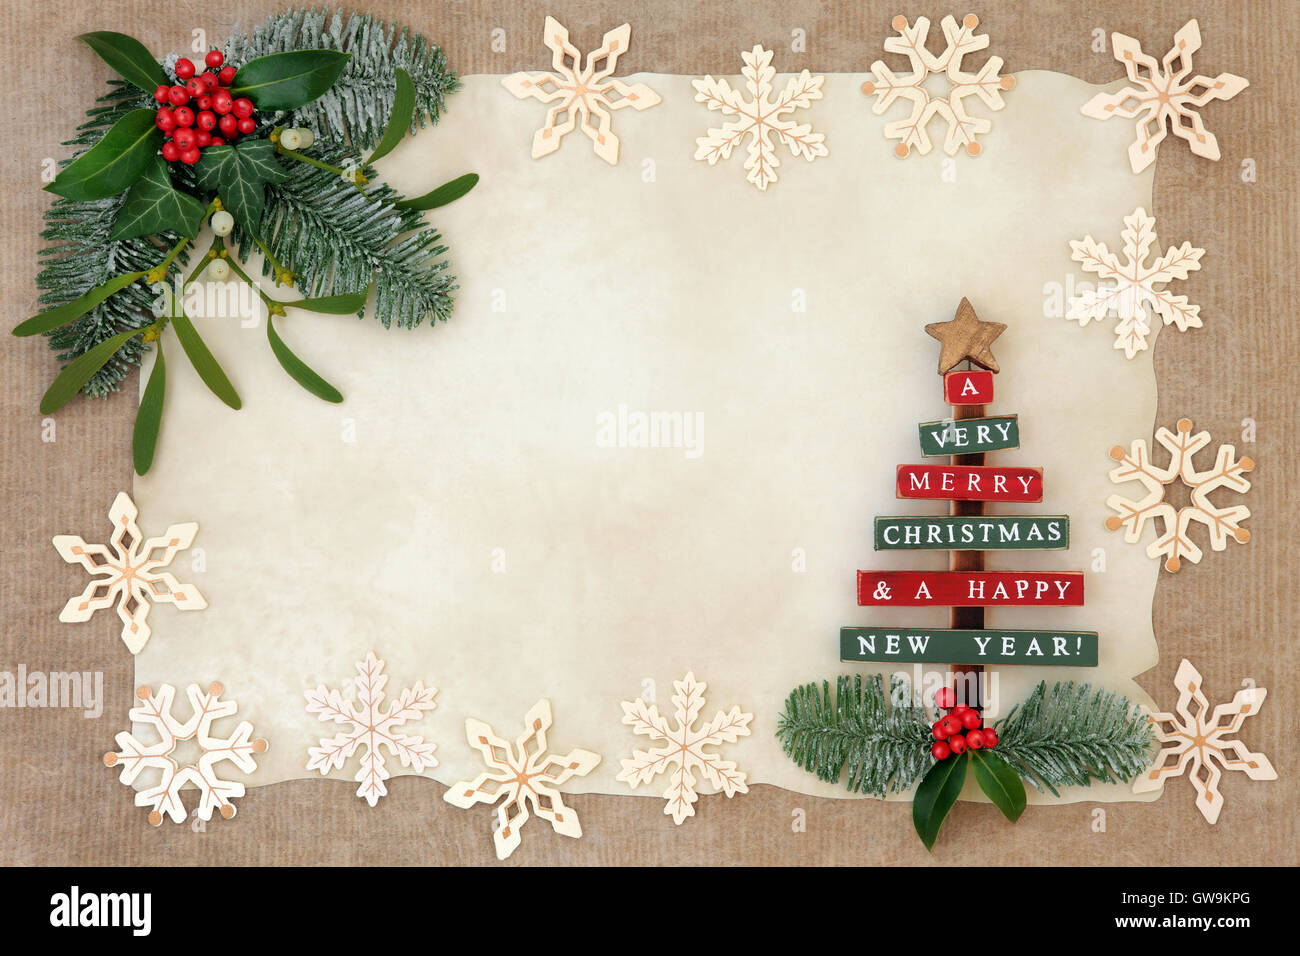 Christmas abstract background border with old wooden tree and snowflake decorations, holly, ivy, mistletoe and snow covered fir Stock Photo